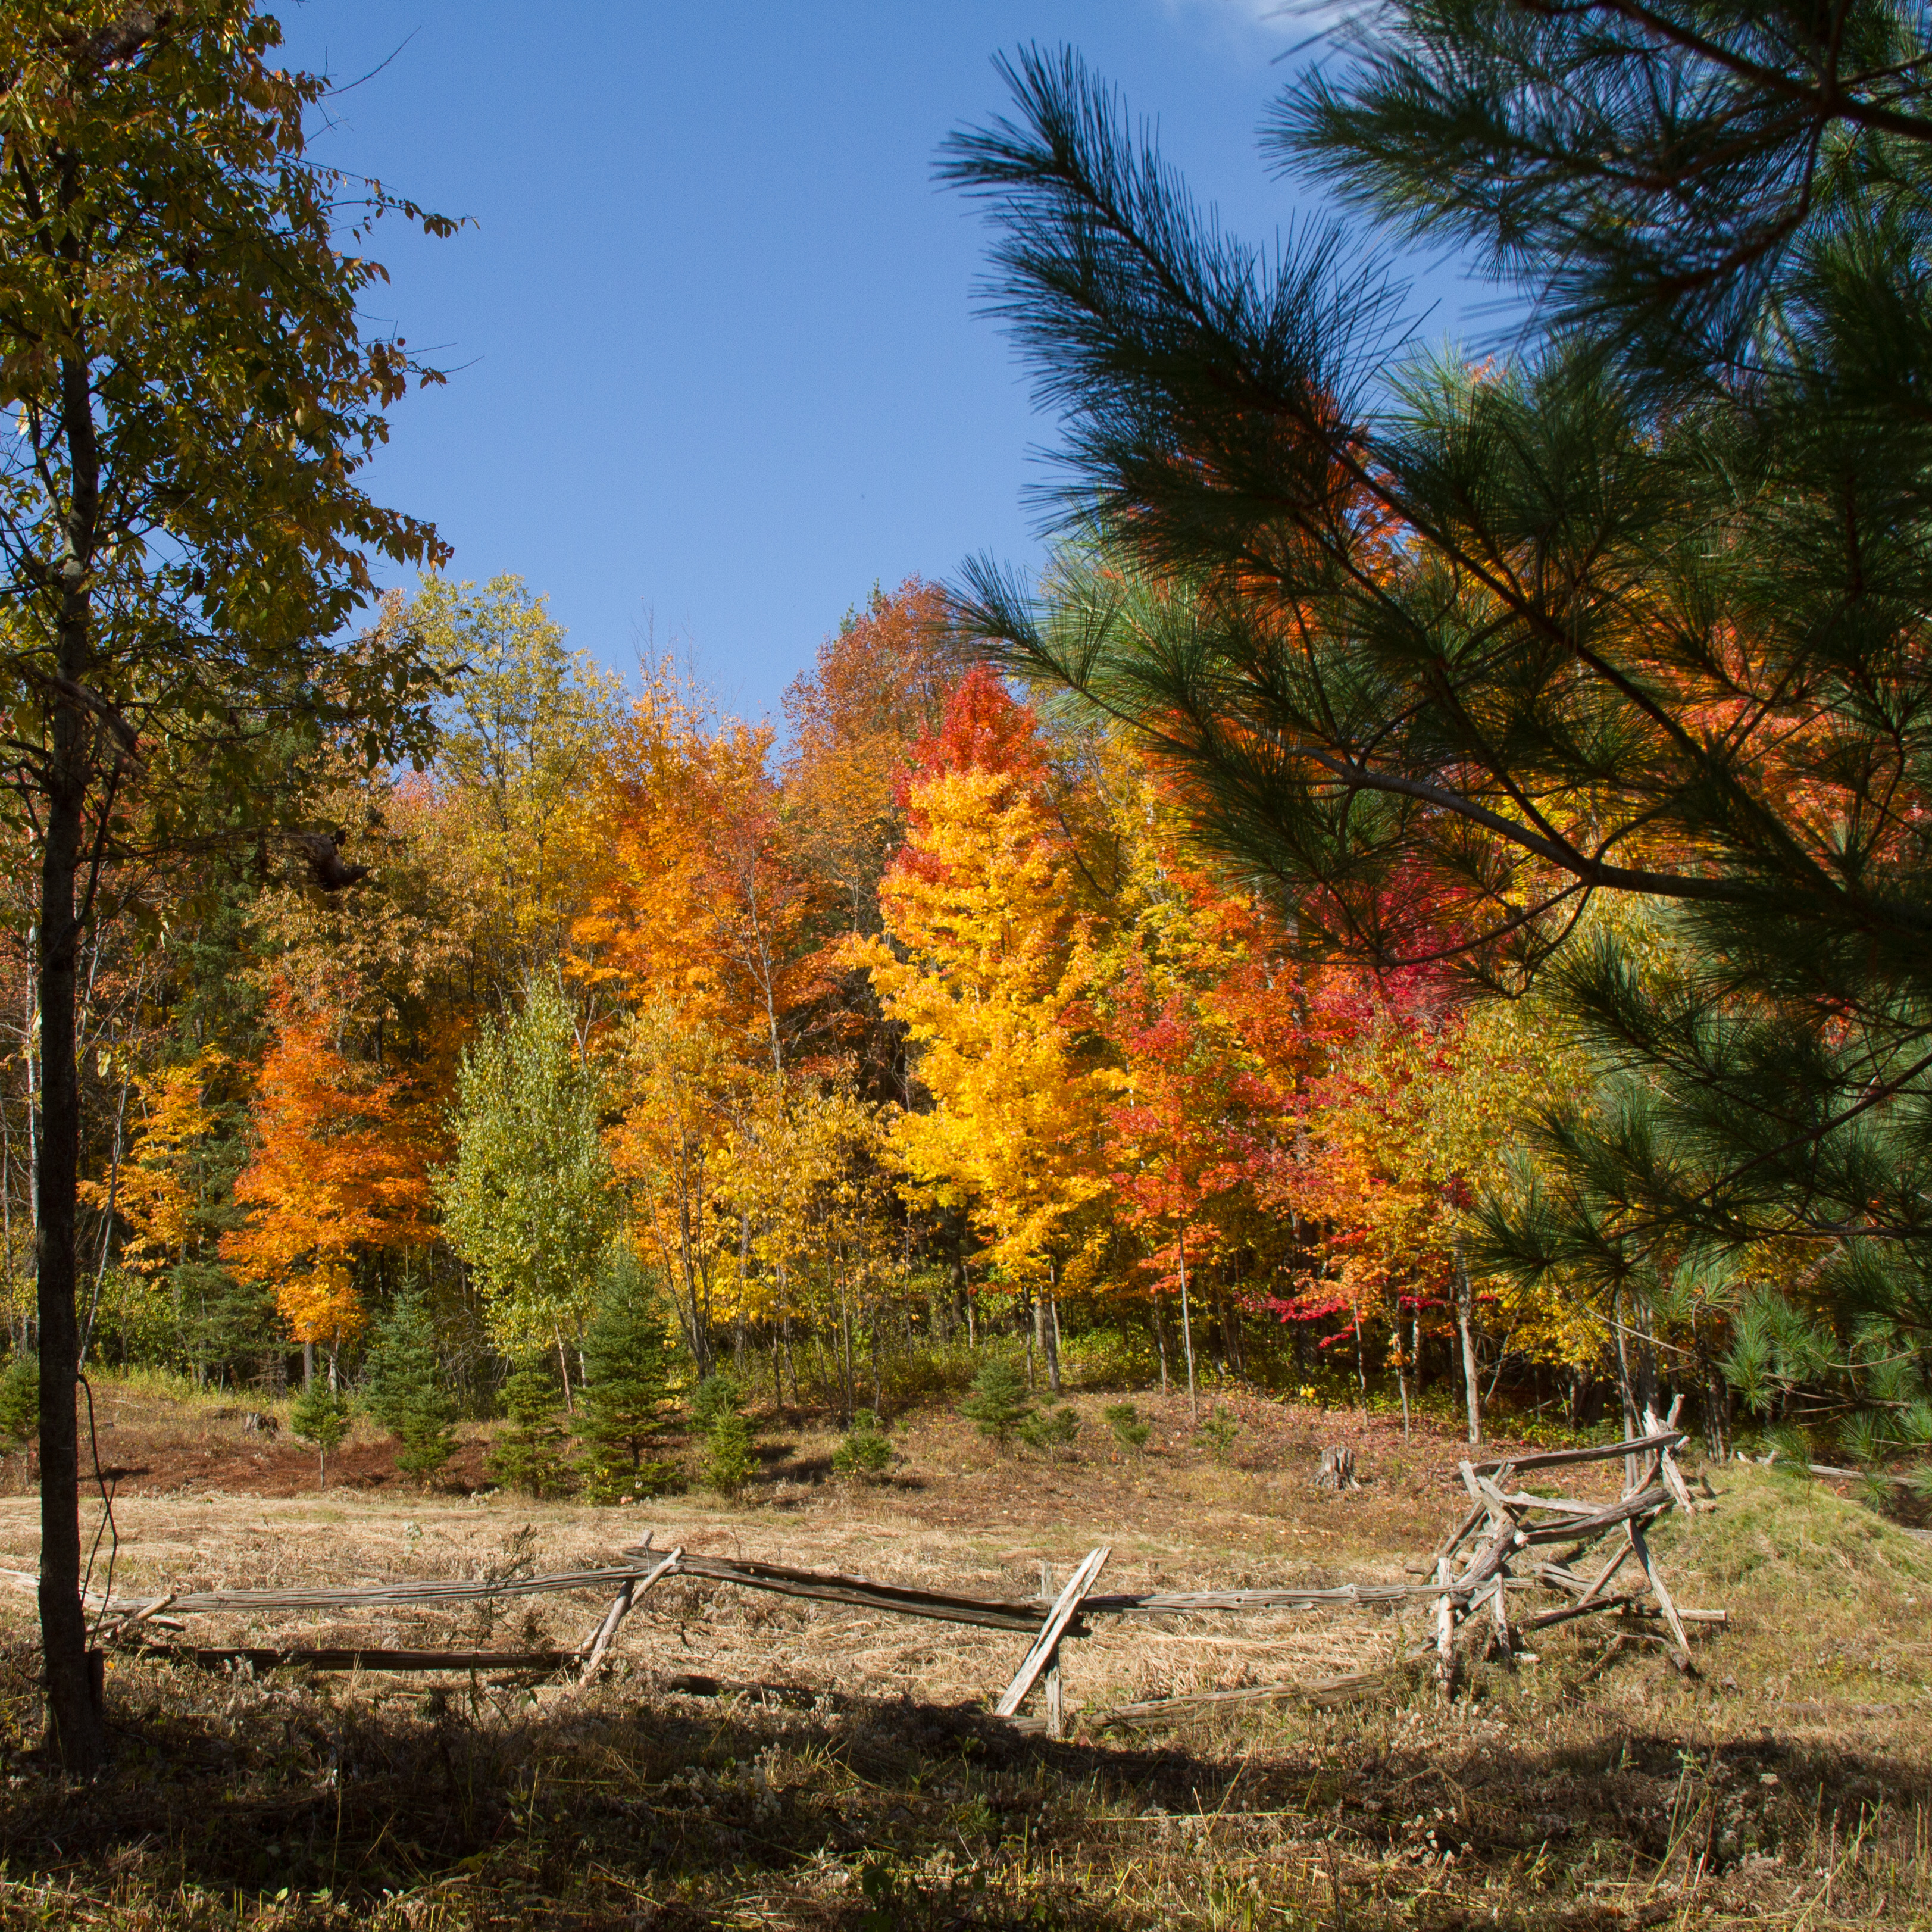 Trees at the edge of a field at Glen Villa are typical of autumn glory in Quebec's Eastern Townships.